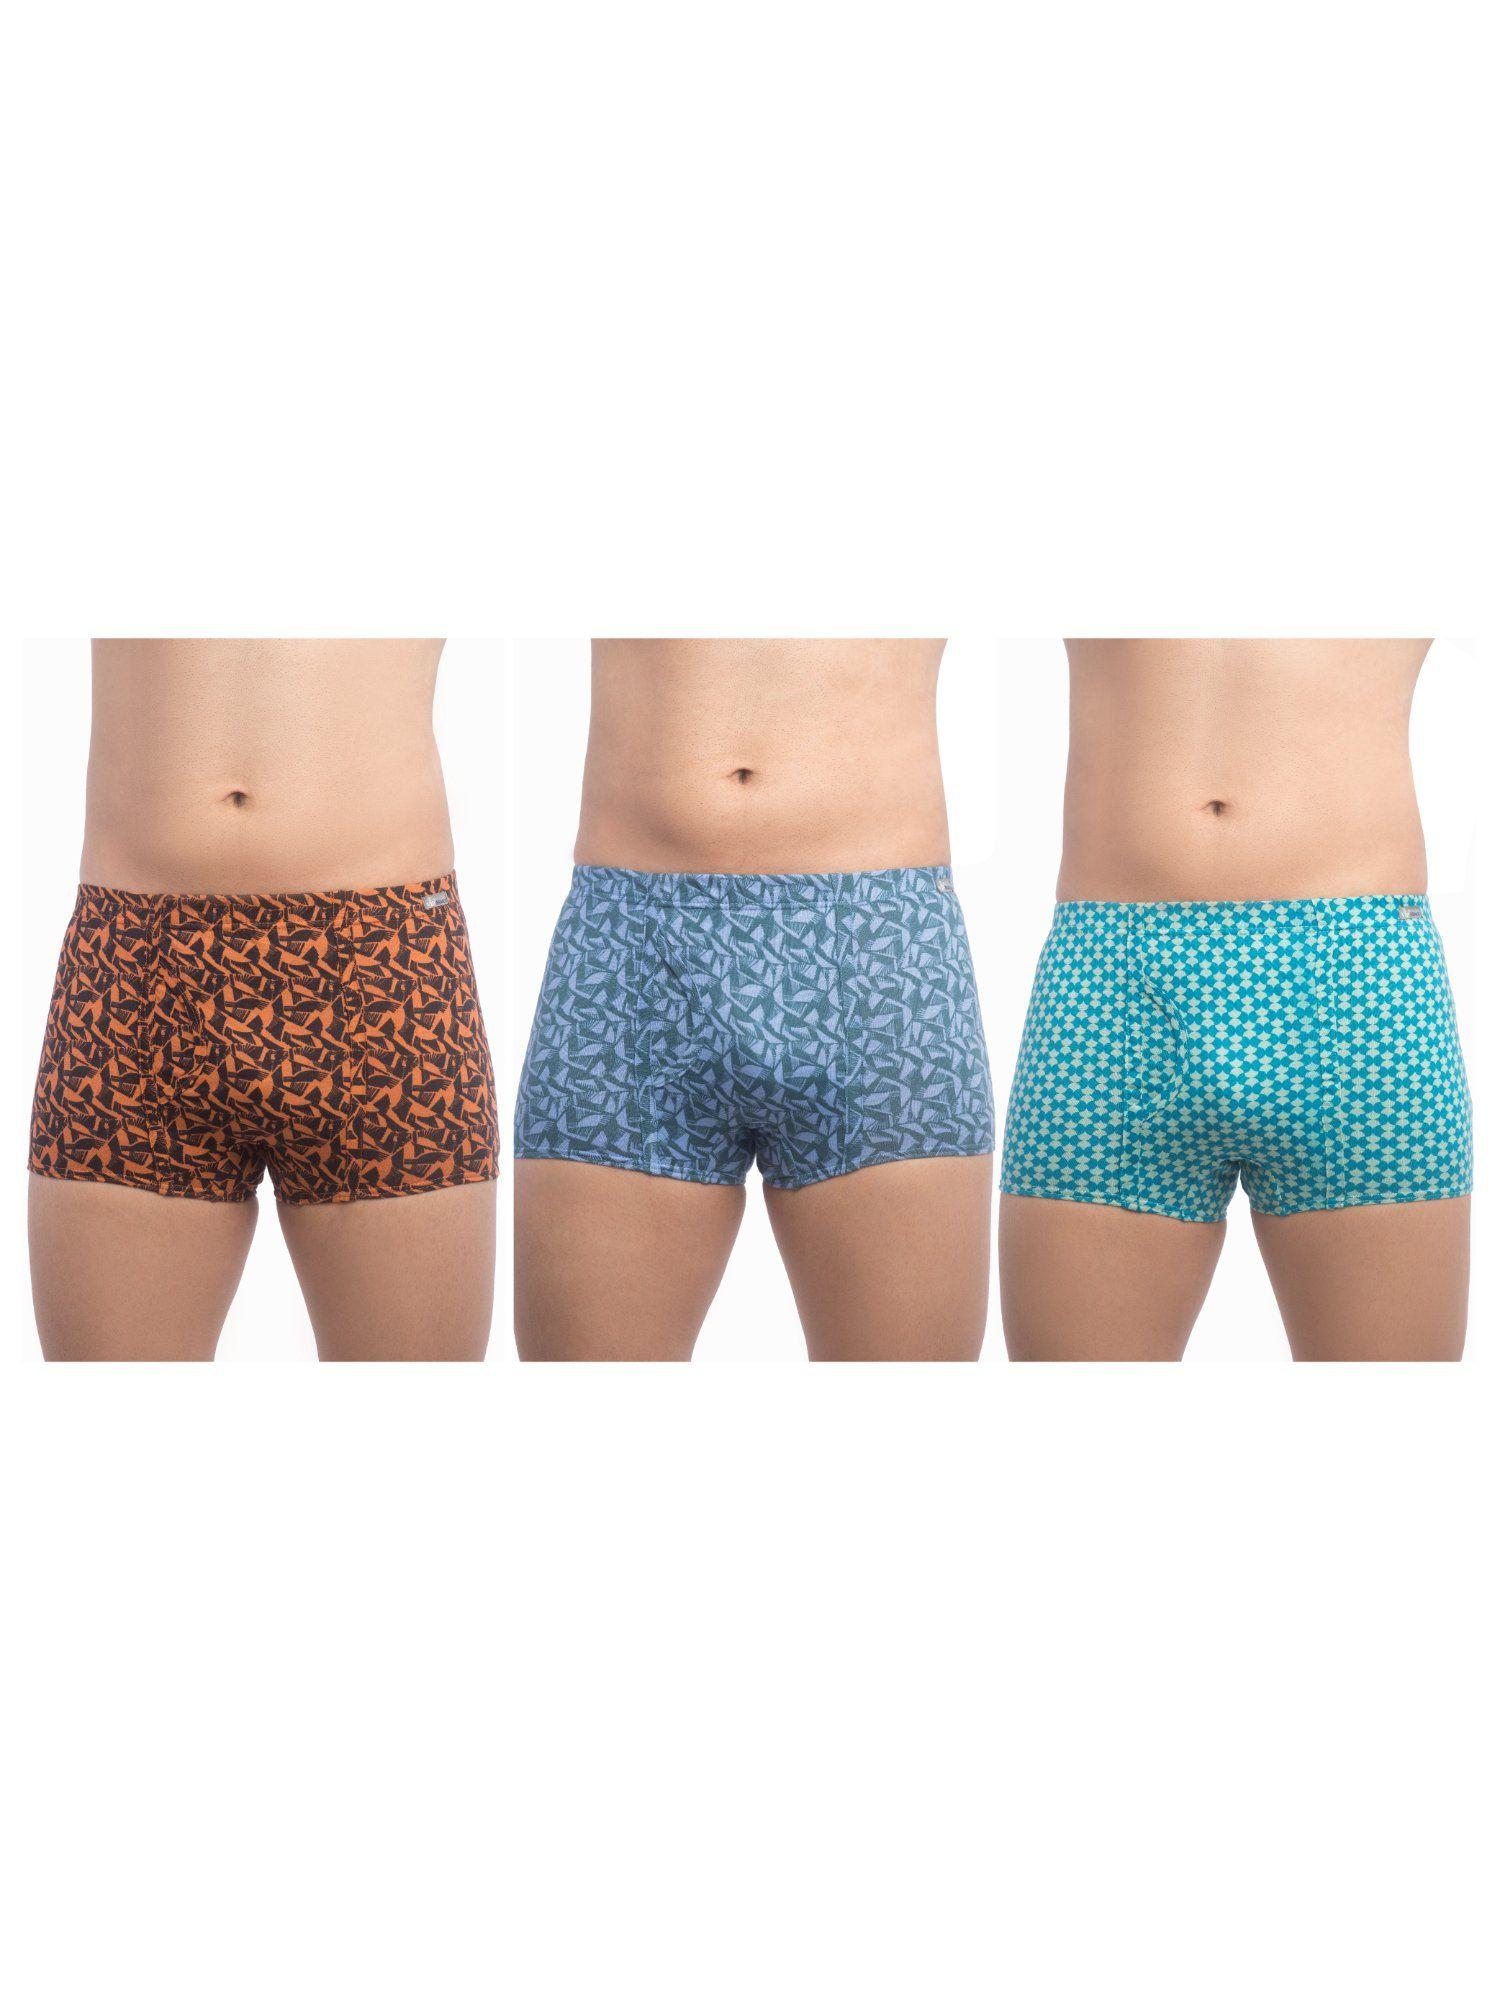 mens cotton brando printed mini trunks, colors & prints may vary (pack of 3)